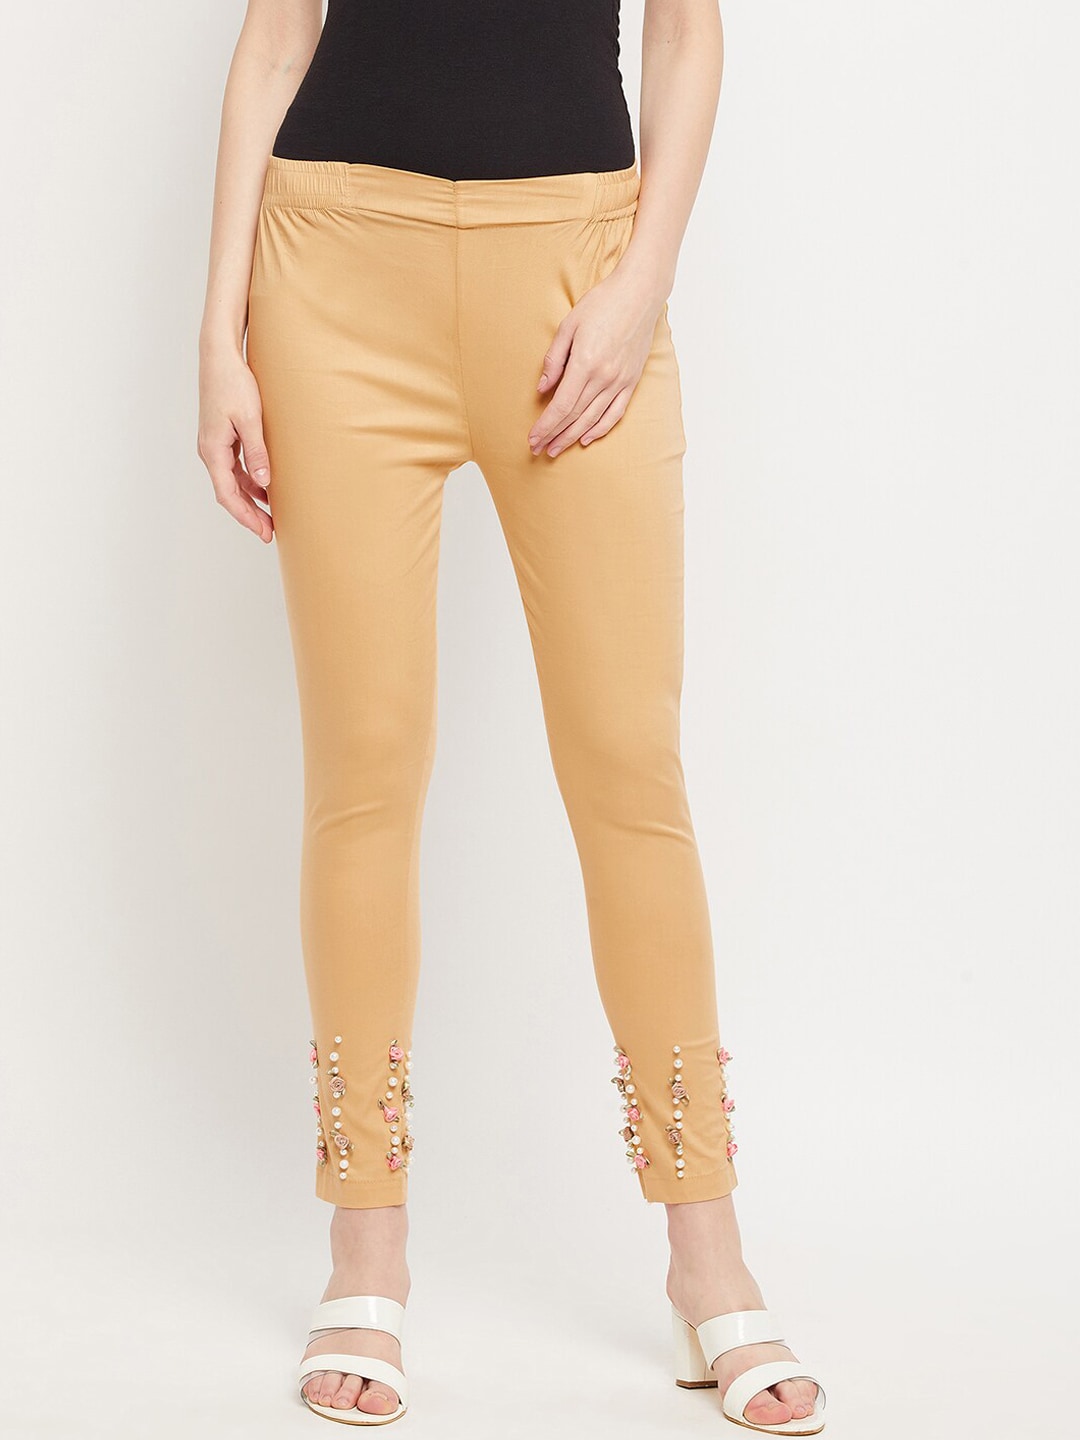 Clora Creation Women Beige Embellished Trousers Price in India